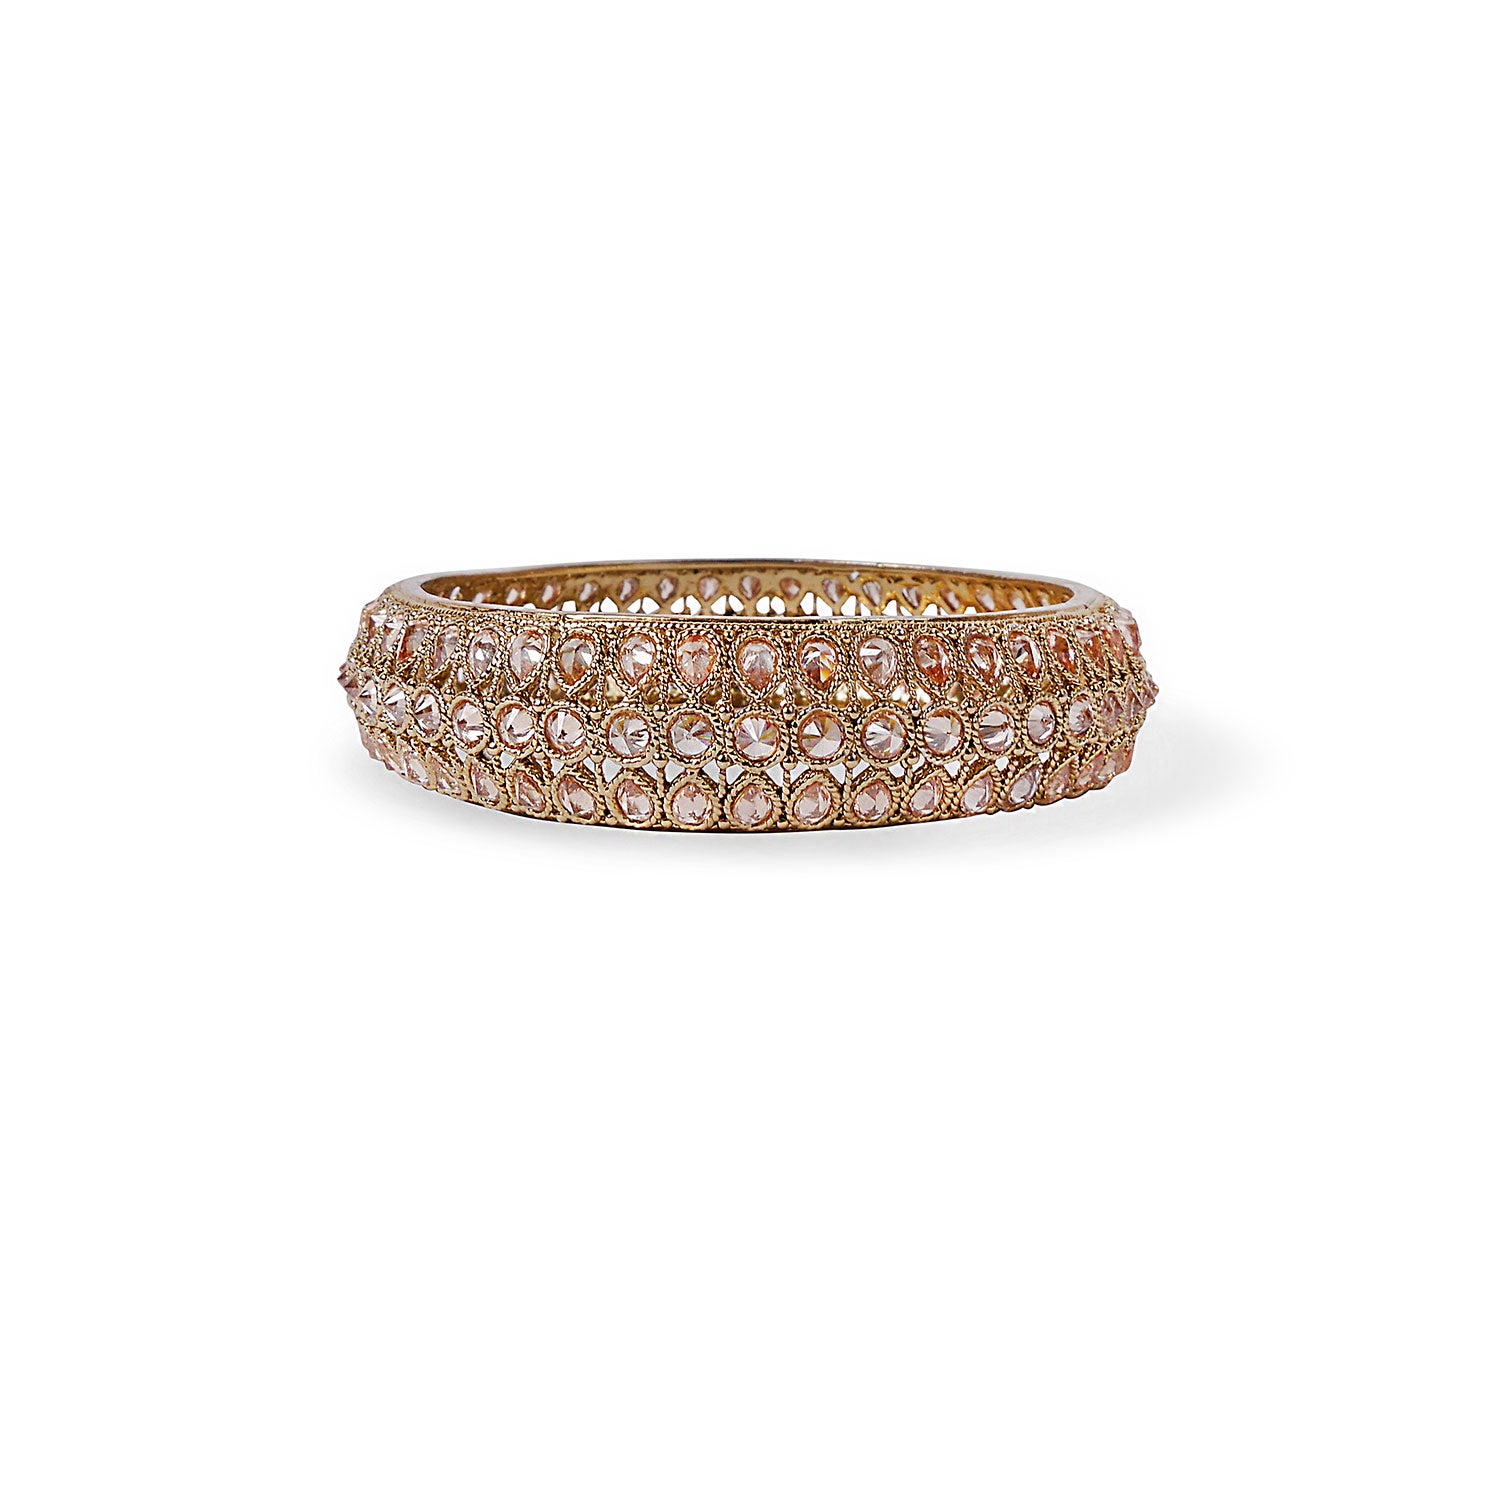 Rama Indian Bangle in Antique Gold